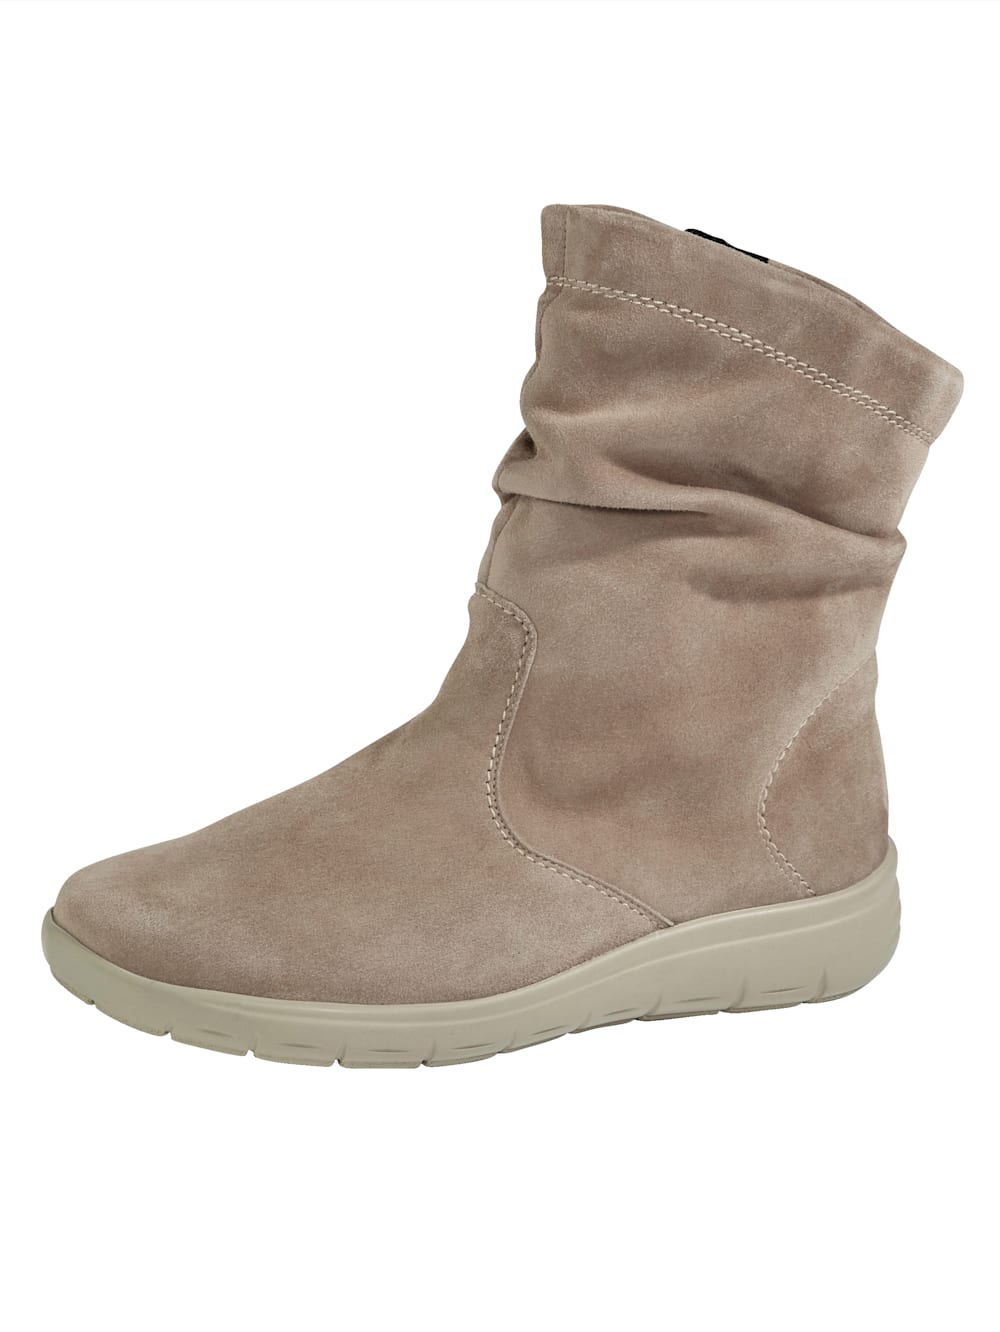 Vamos Stiefelette mit Shock-Absorber - Taupe